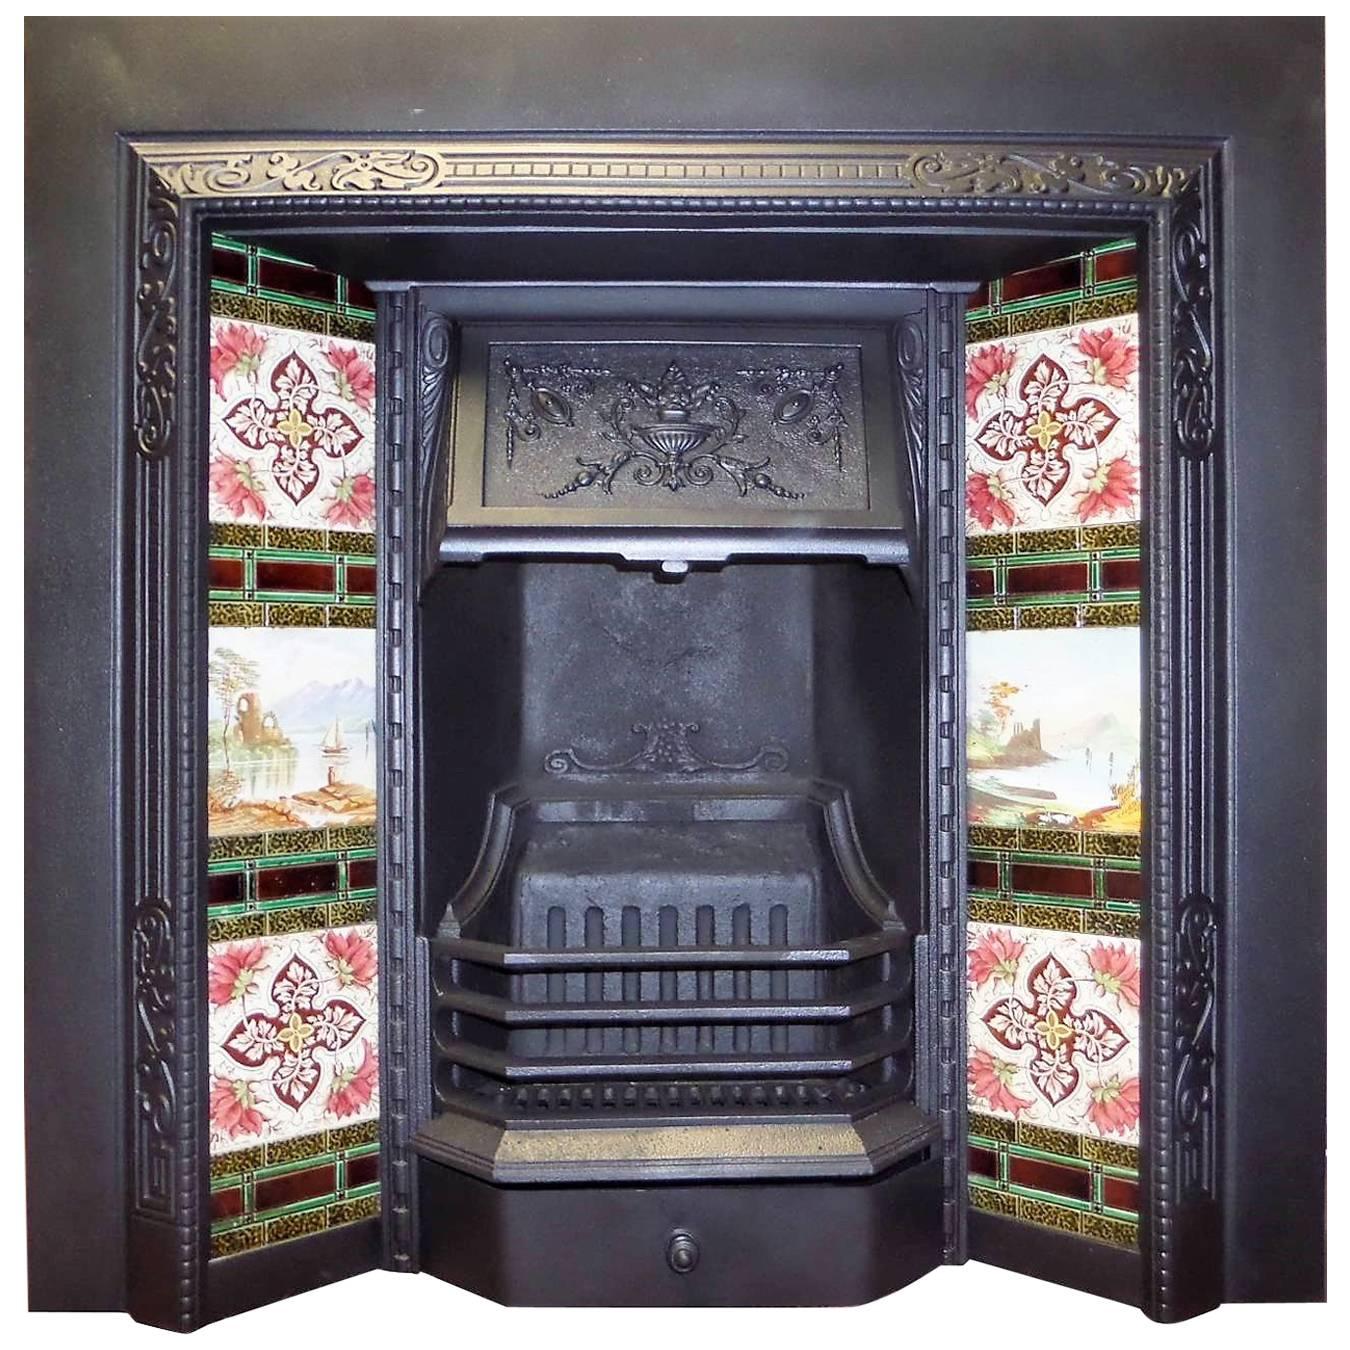 19th Century Victorian Cast Iron Fireplace Insert and Original Tile Set For Sale